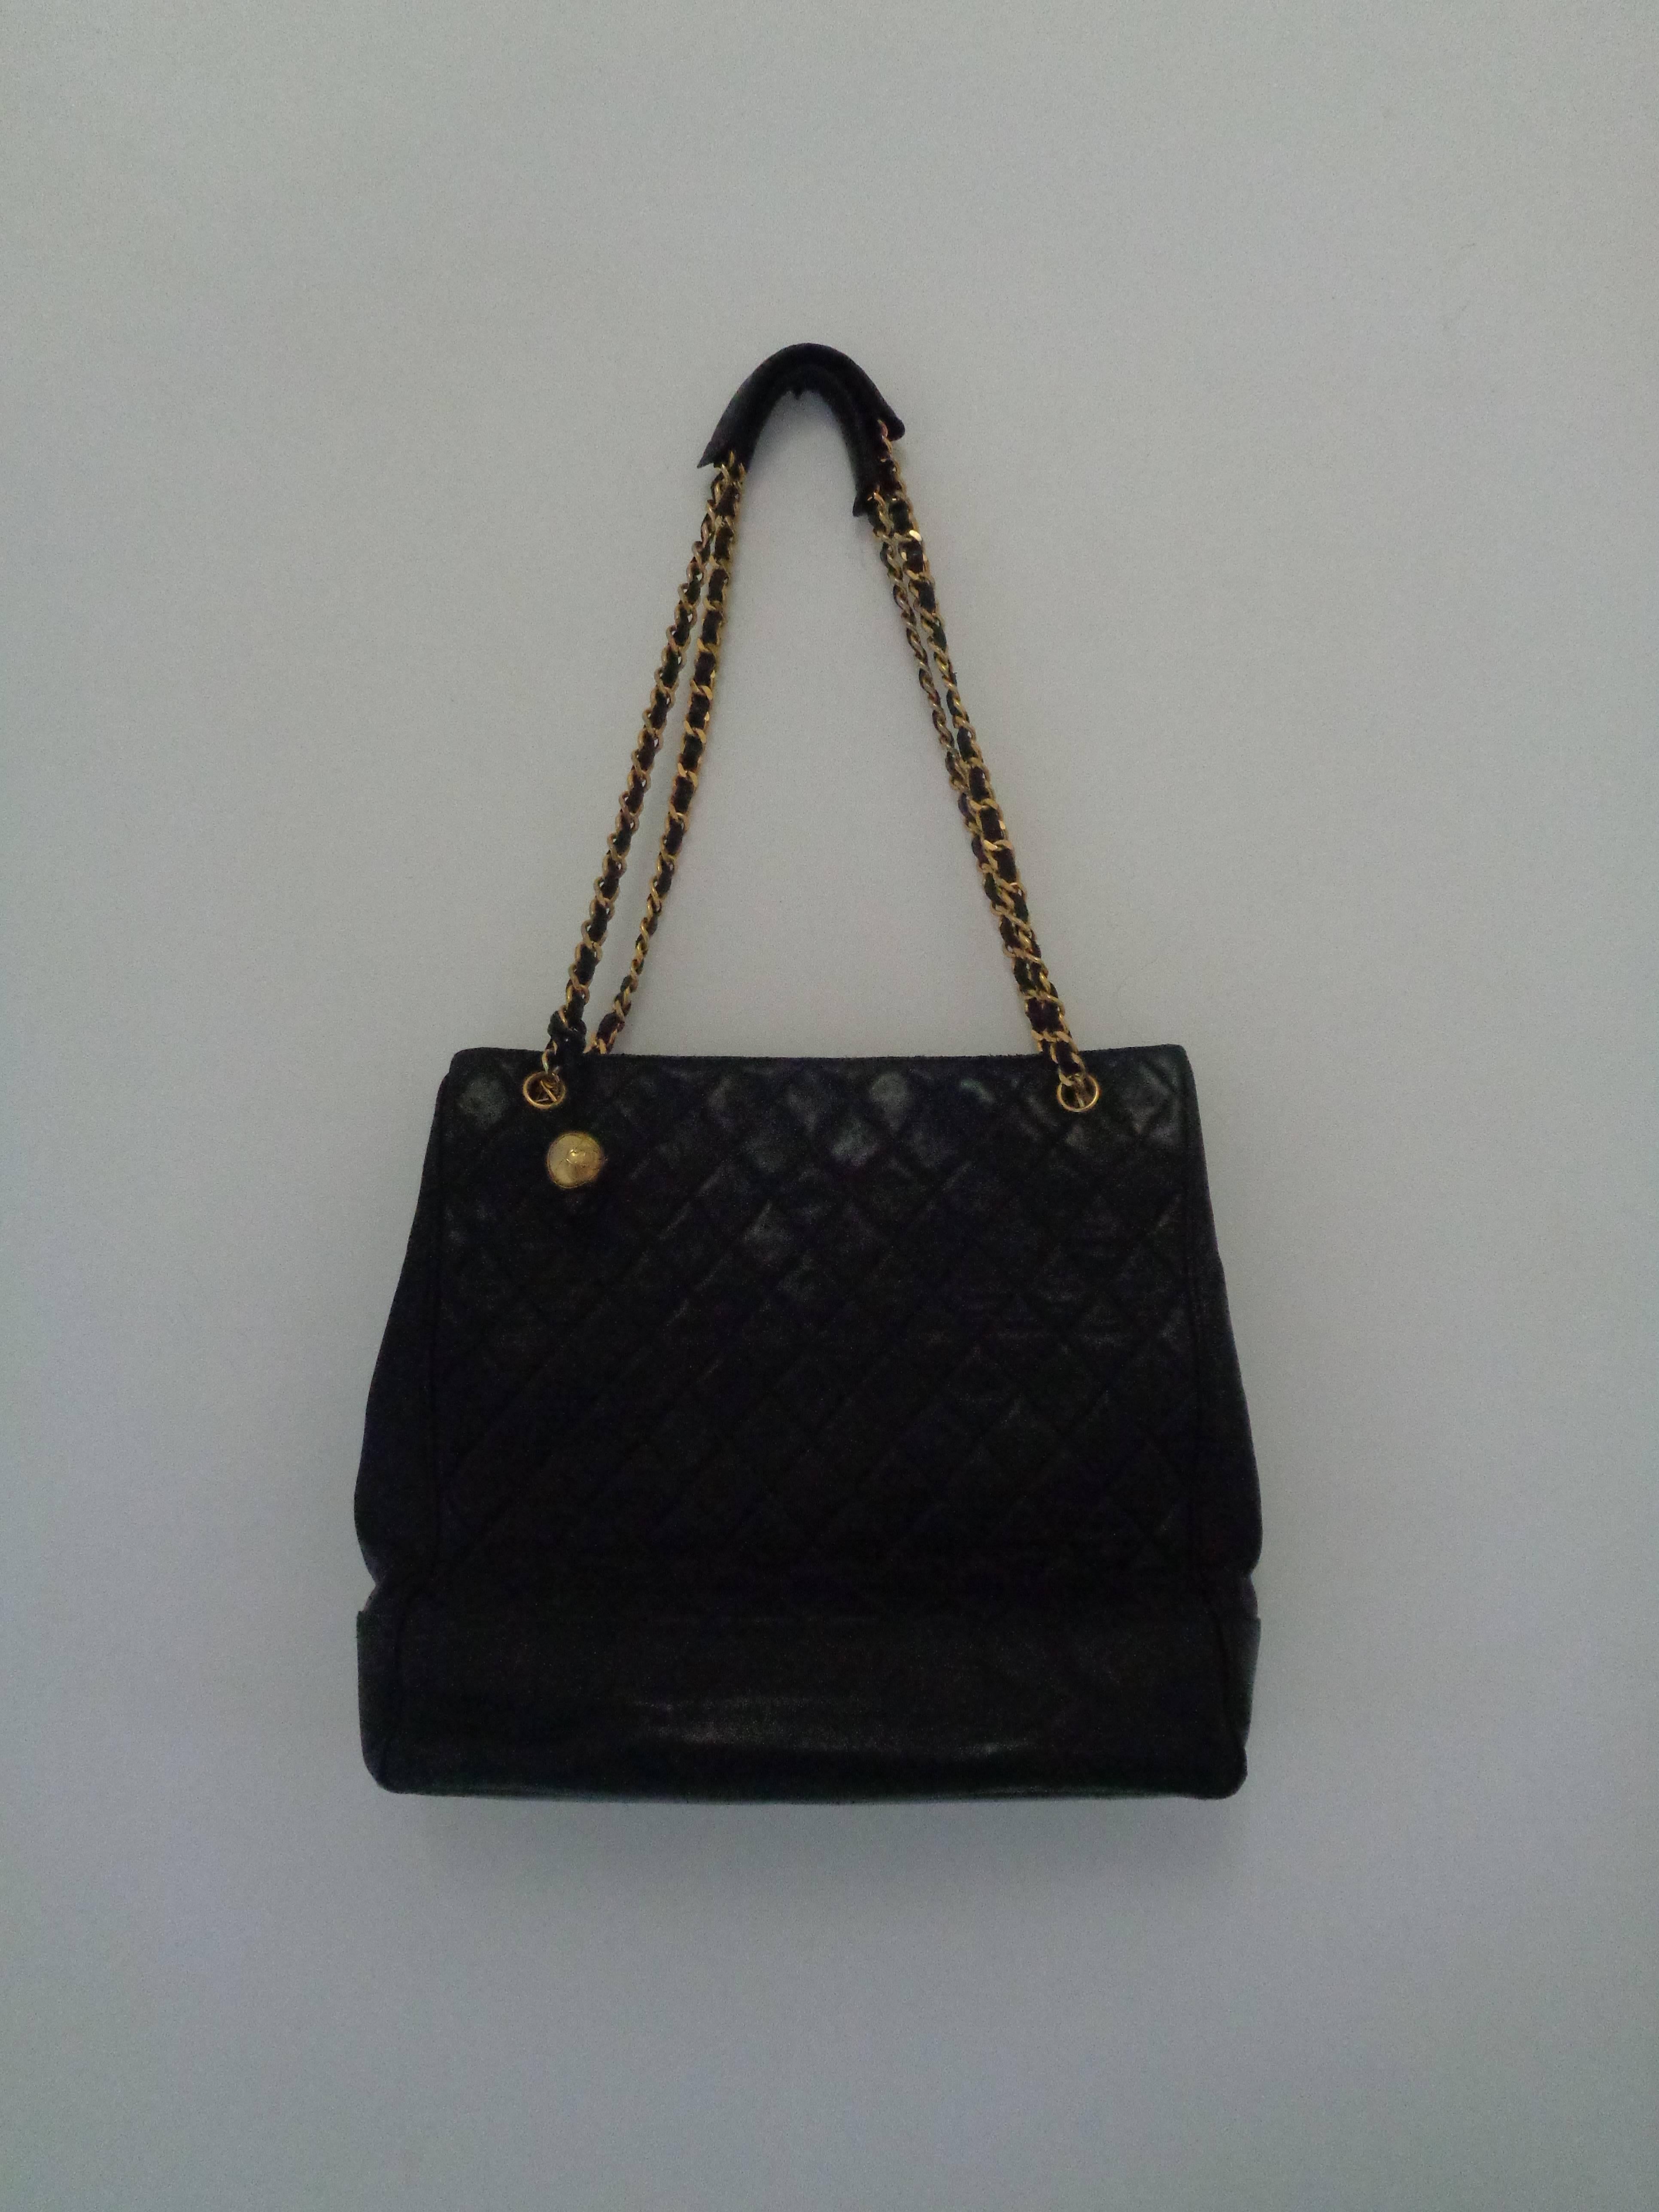 1980s Chanel black leather Shoulder Bag

totally made in france with gold tone hardware

1 pocket outside 

2 pockets in the inside 


as for age bag is in good condition not perfect

please check out carefully pictures
